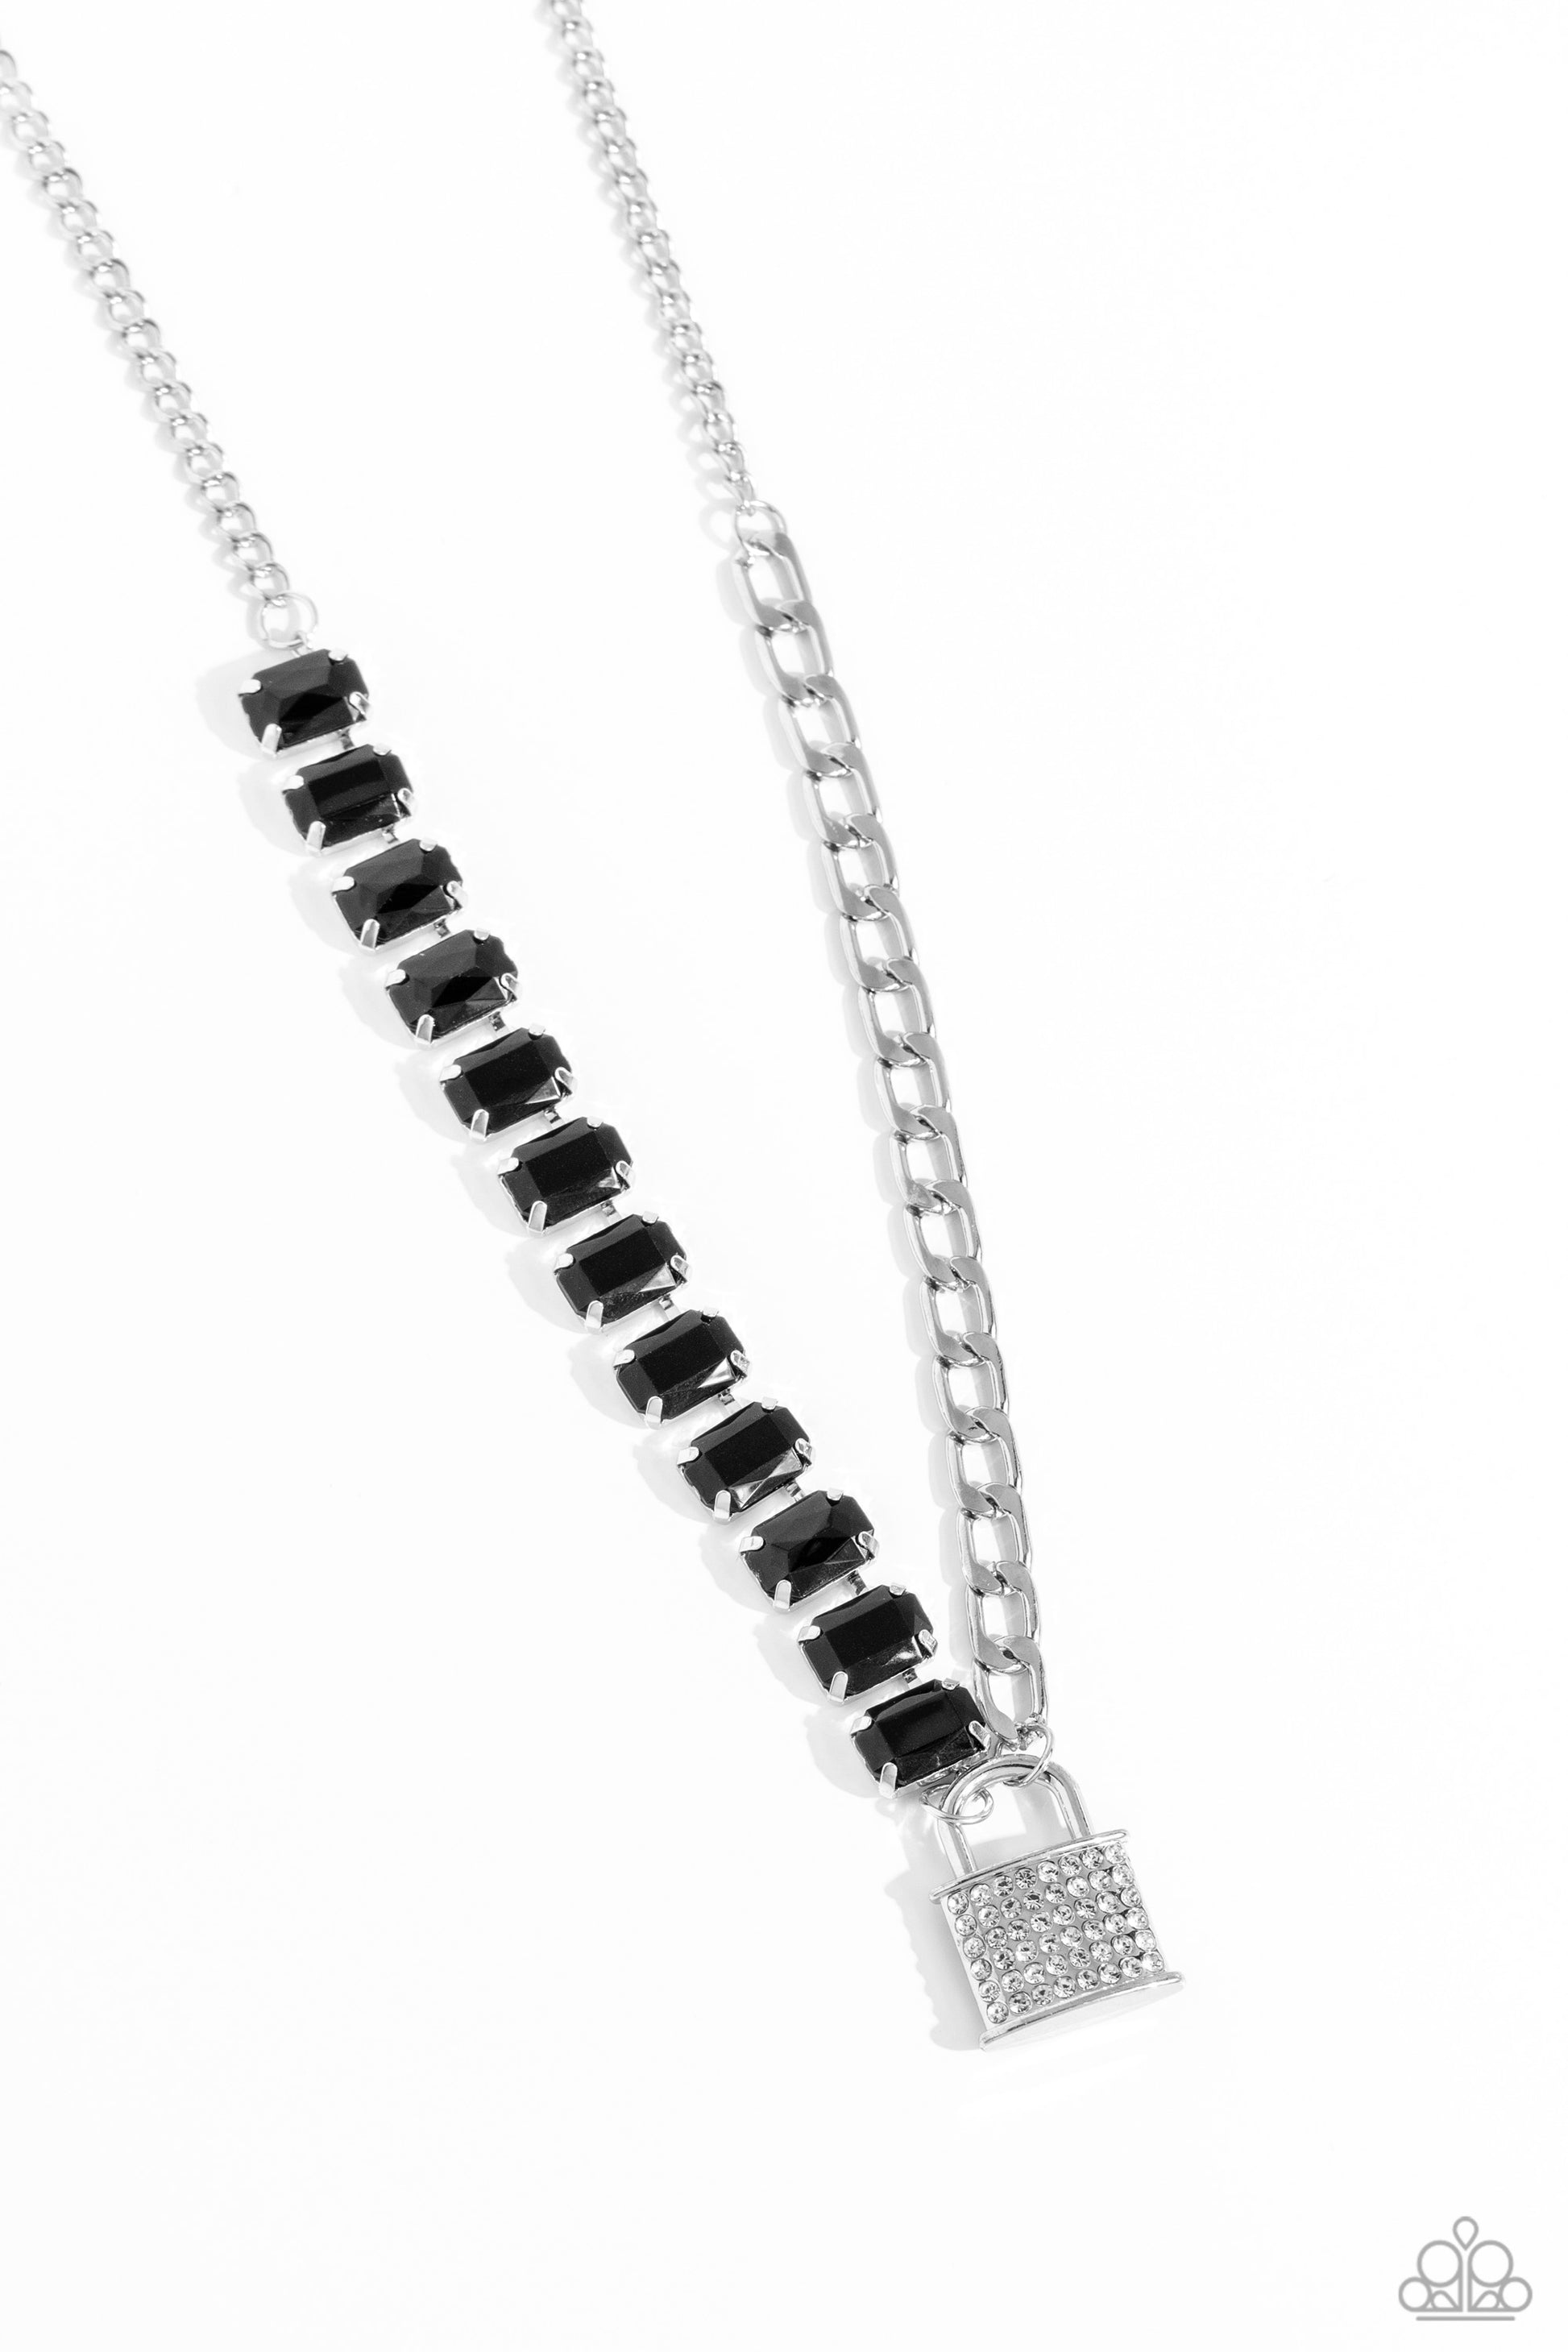 Paparazzi Accessories - LOCK and Roll - Black Necklaces infused on a classic silver chain, a strand of thick silver curb chain, and a collection of exaggerated, black radiant-cut gems in silver pronged fittings combine to create a collision of industrial color around the neckline. An oversized silver lock charm, embossed in white rhinestones, dangles from the gritty display for a touch of soft glitz to the design. Features an adjustable clasp closure. Sold as one individual necklace.